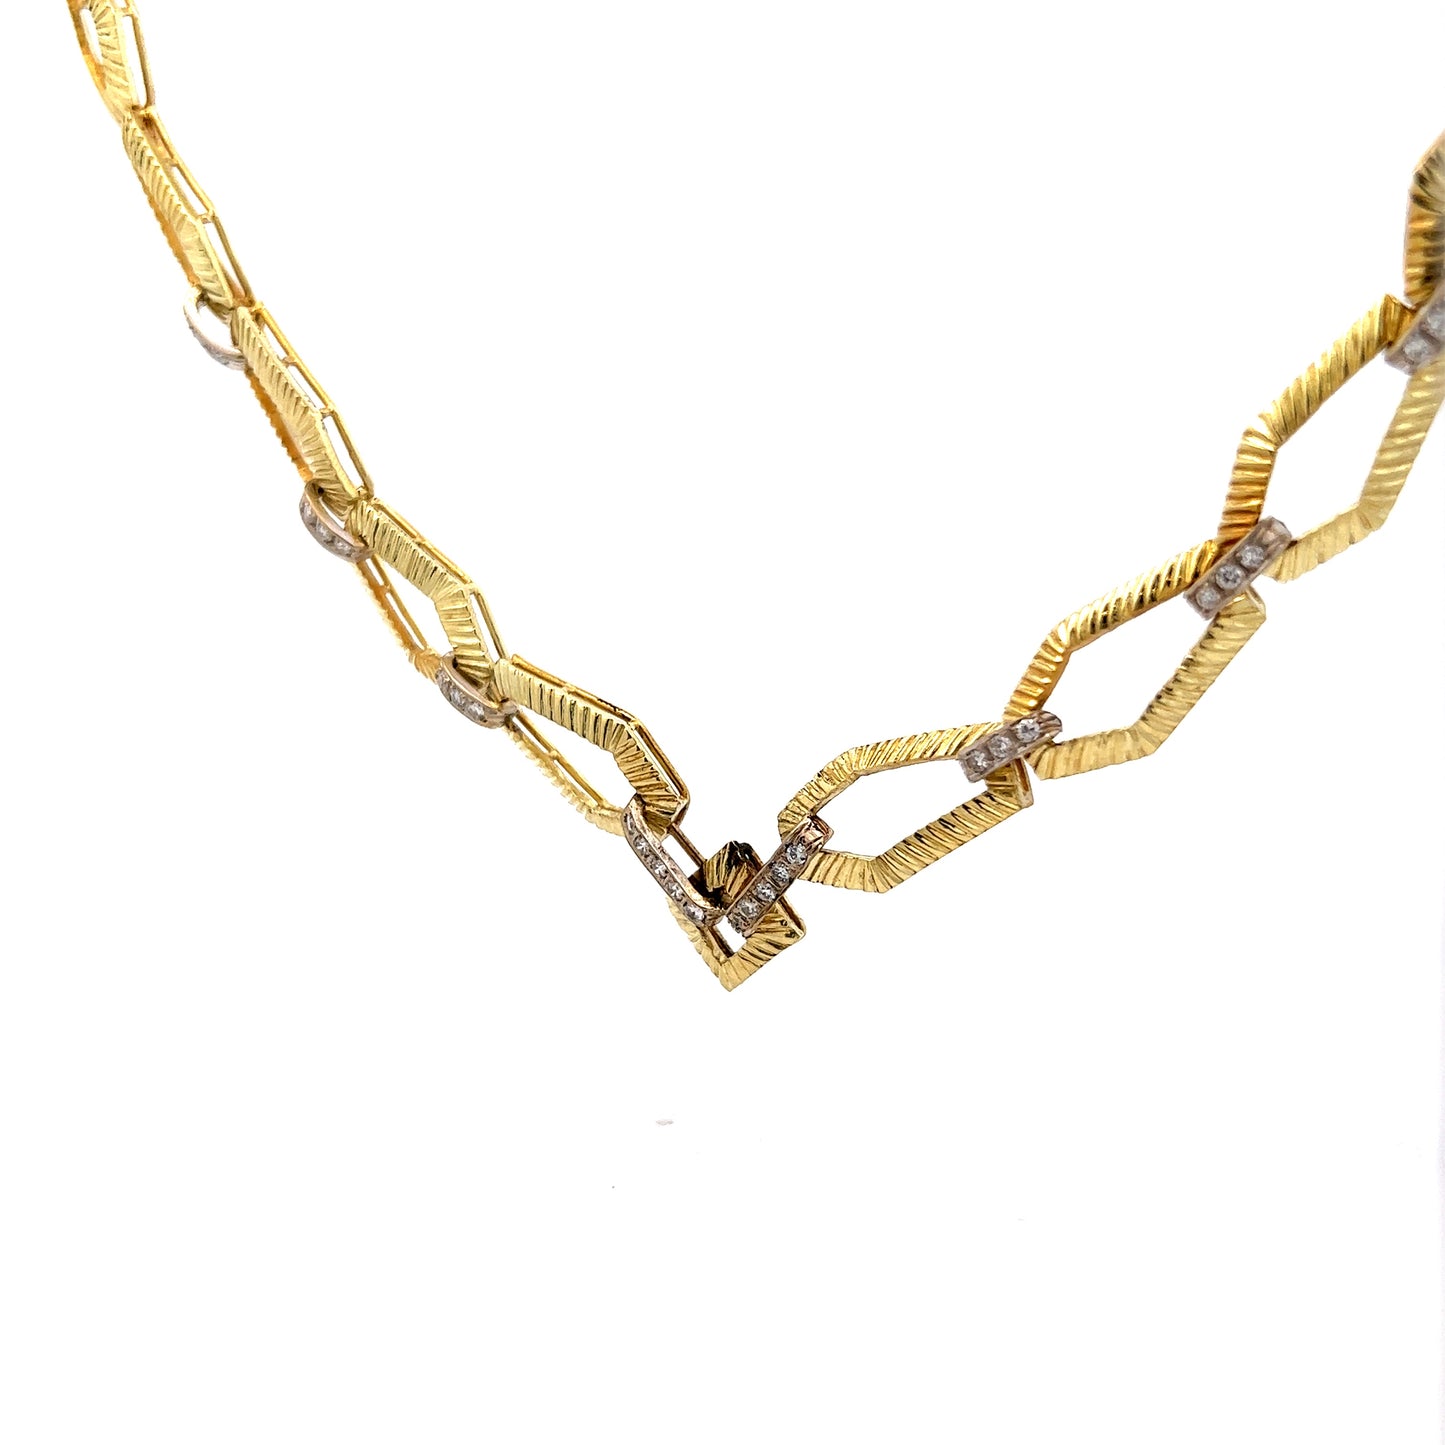 Vintage Mid-Century Diamond Link Necklace in 18k Yellow Gold